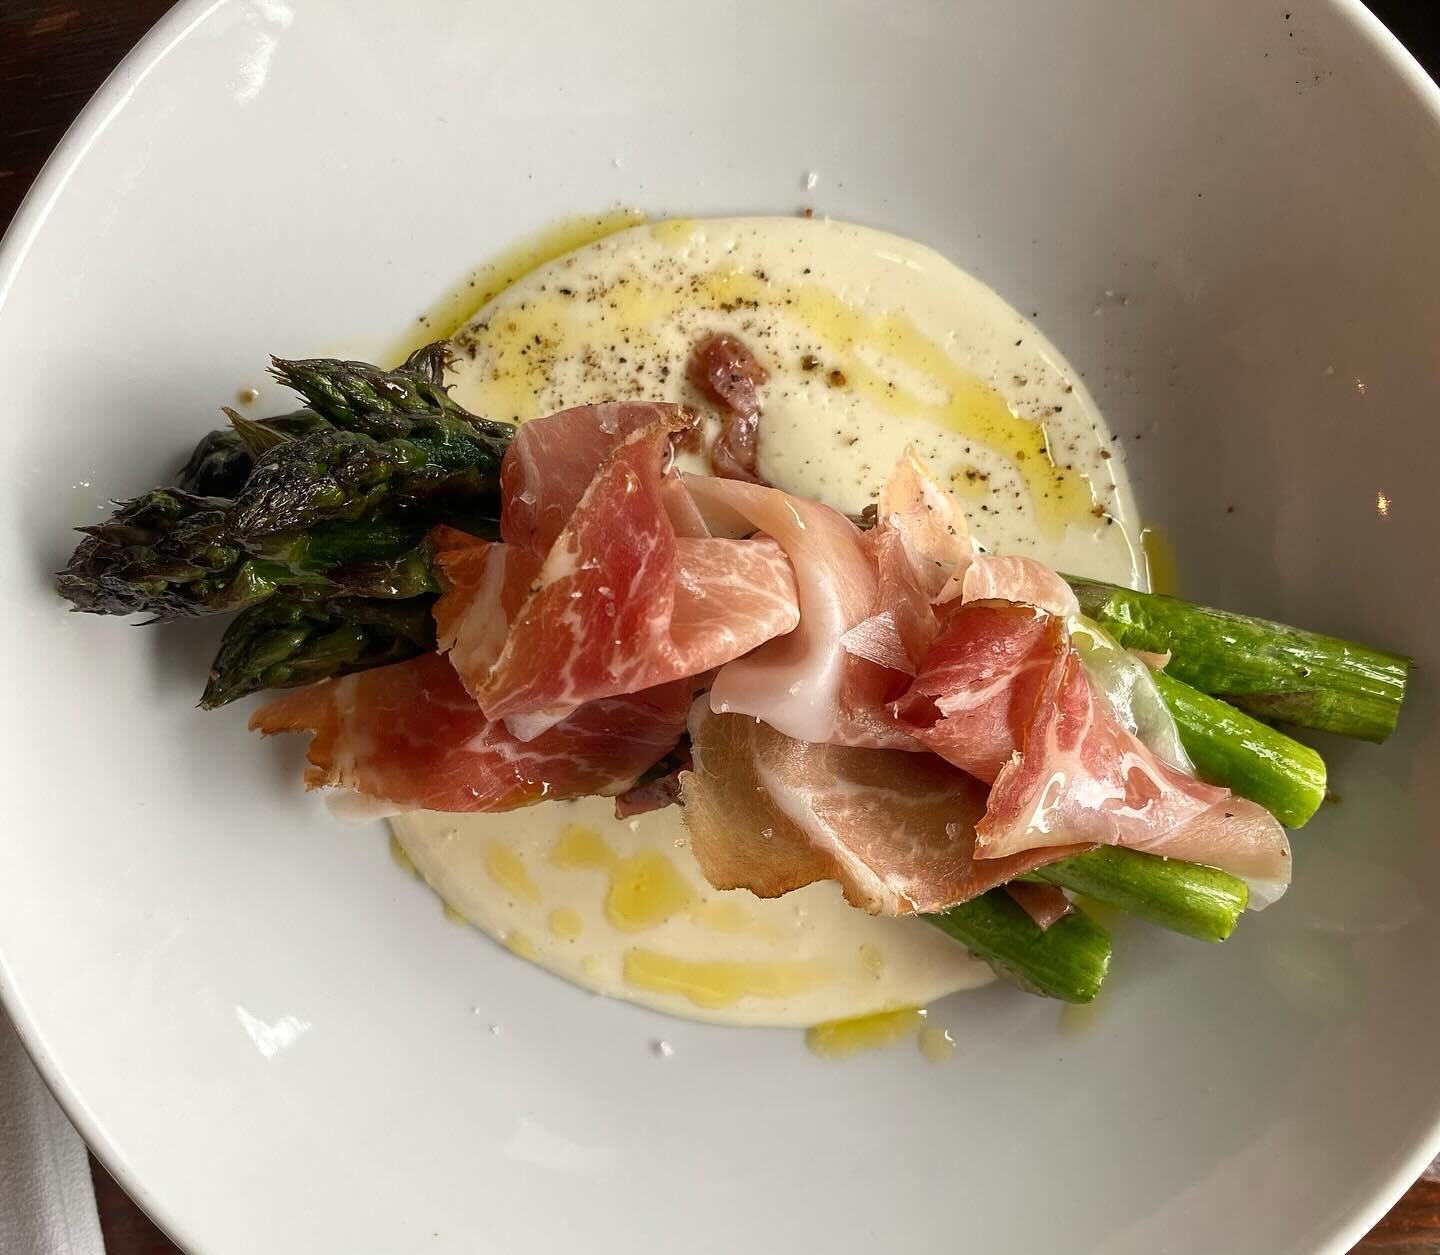 We have a special antipasti for you tonight on Main Street - Local asparagus, scamorza fonduta and speck. Enjoy!